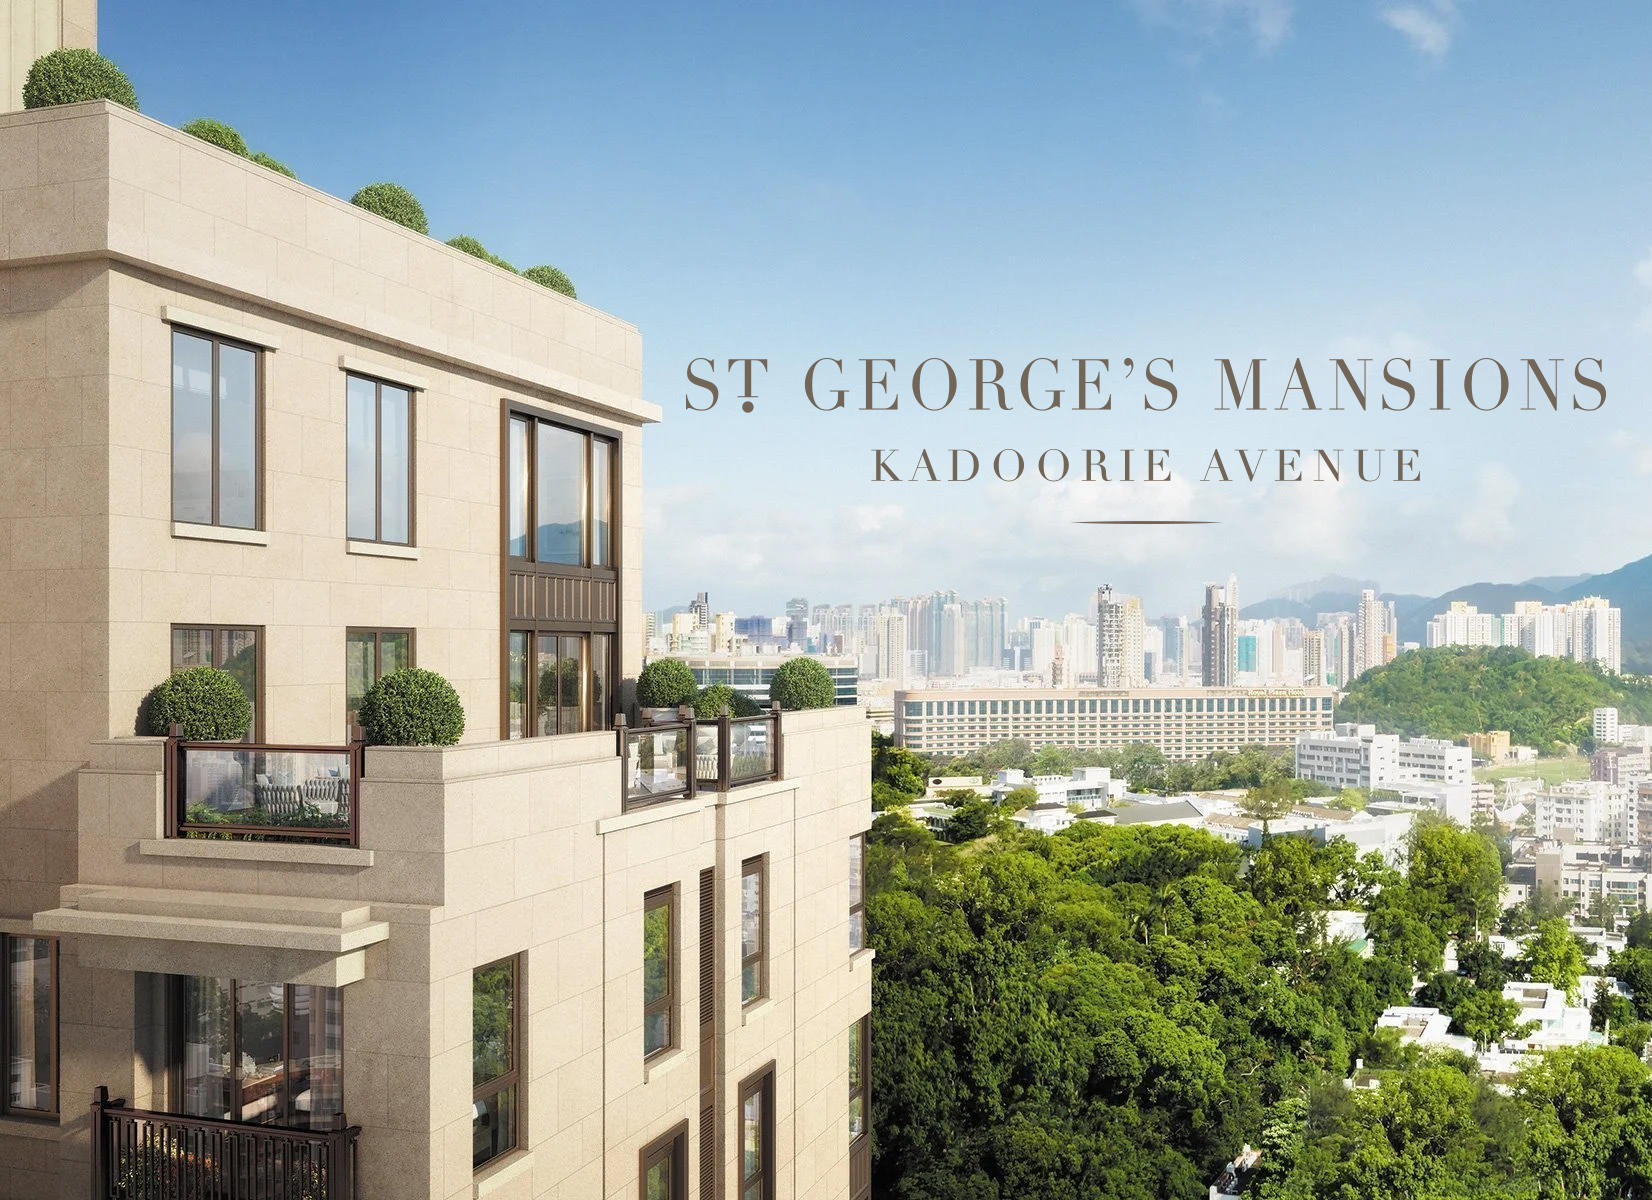 St. George’s Mansions